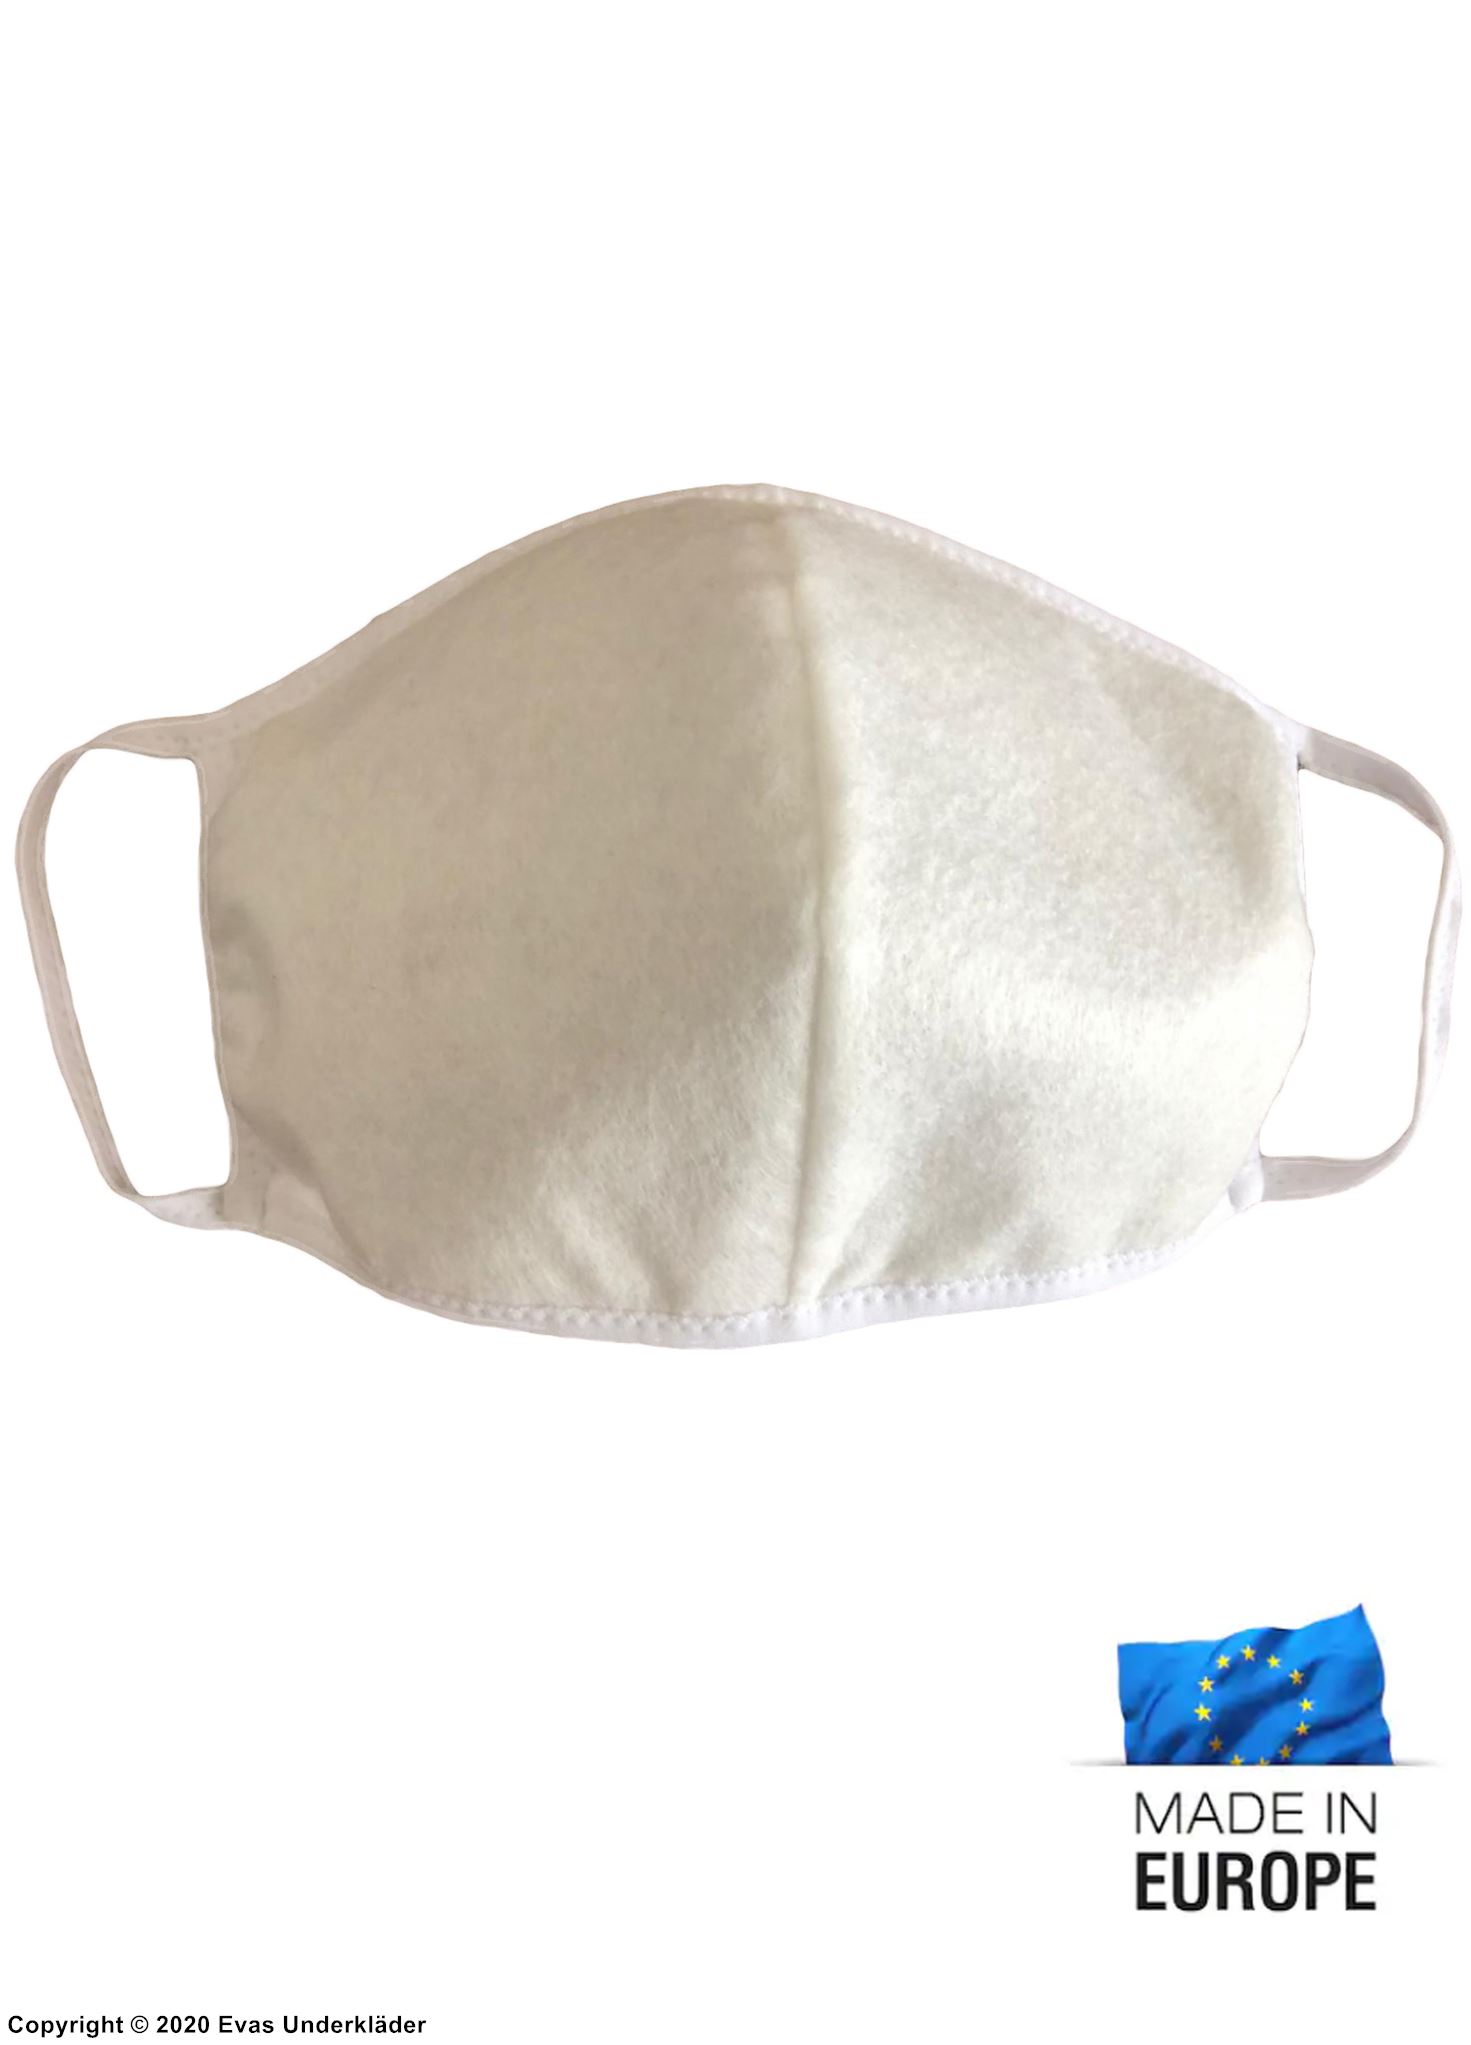 Face mask / mouth cover, silver ions, triple layer